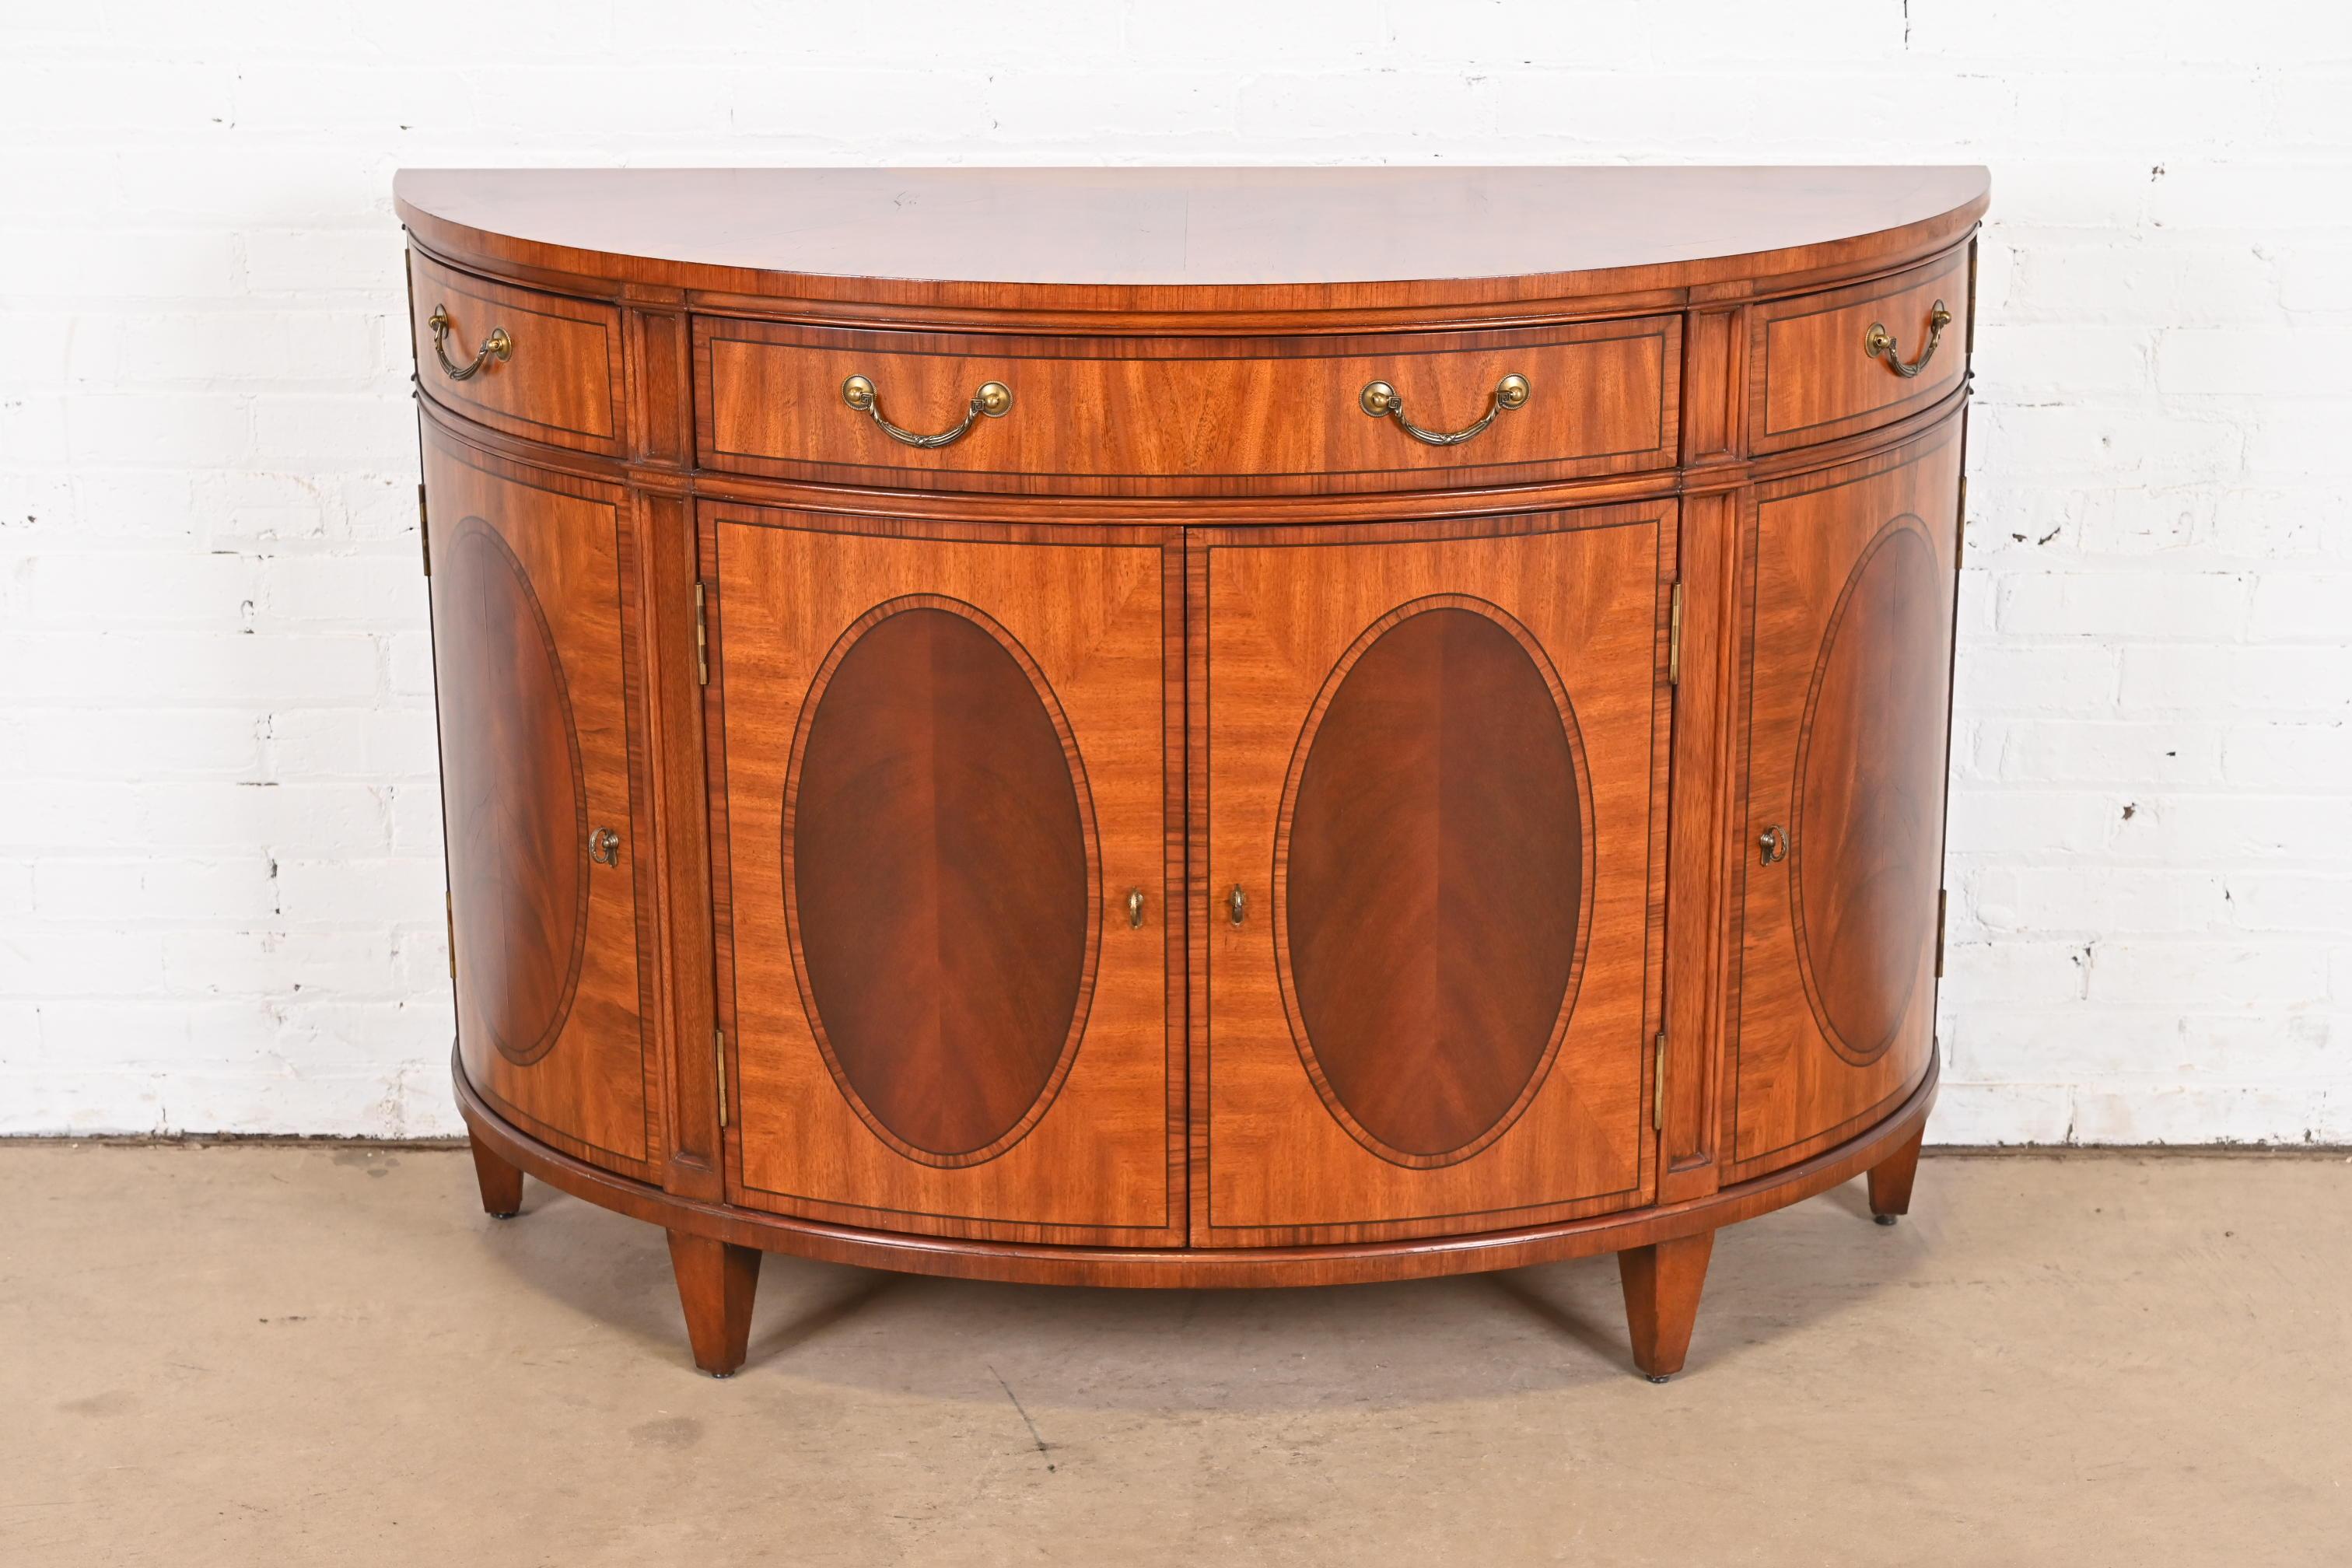 A gorgeous Regency or Georgian style demilune sideboard, console, or bar cabinet

Circa Late 20th Century

Inlaid mahogany and satinwood, with original brass hardware.

Measures: 50